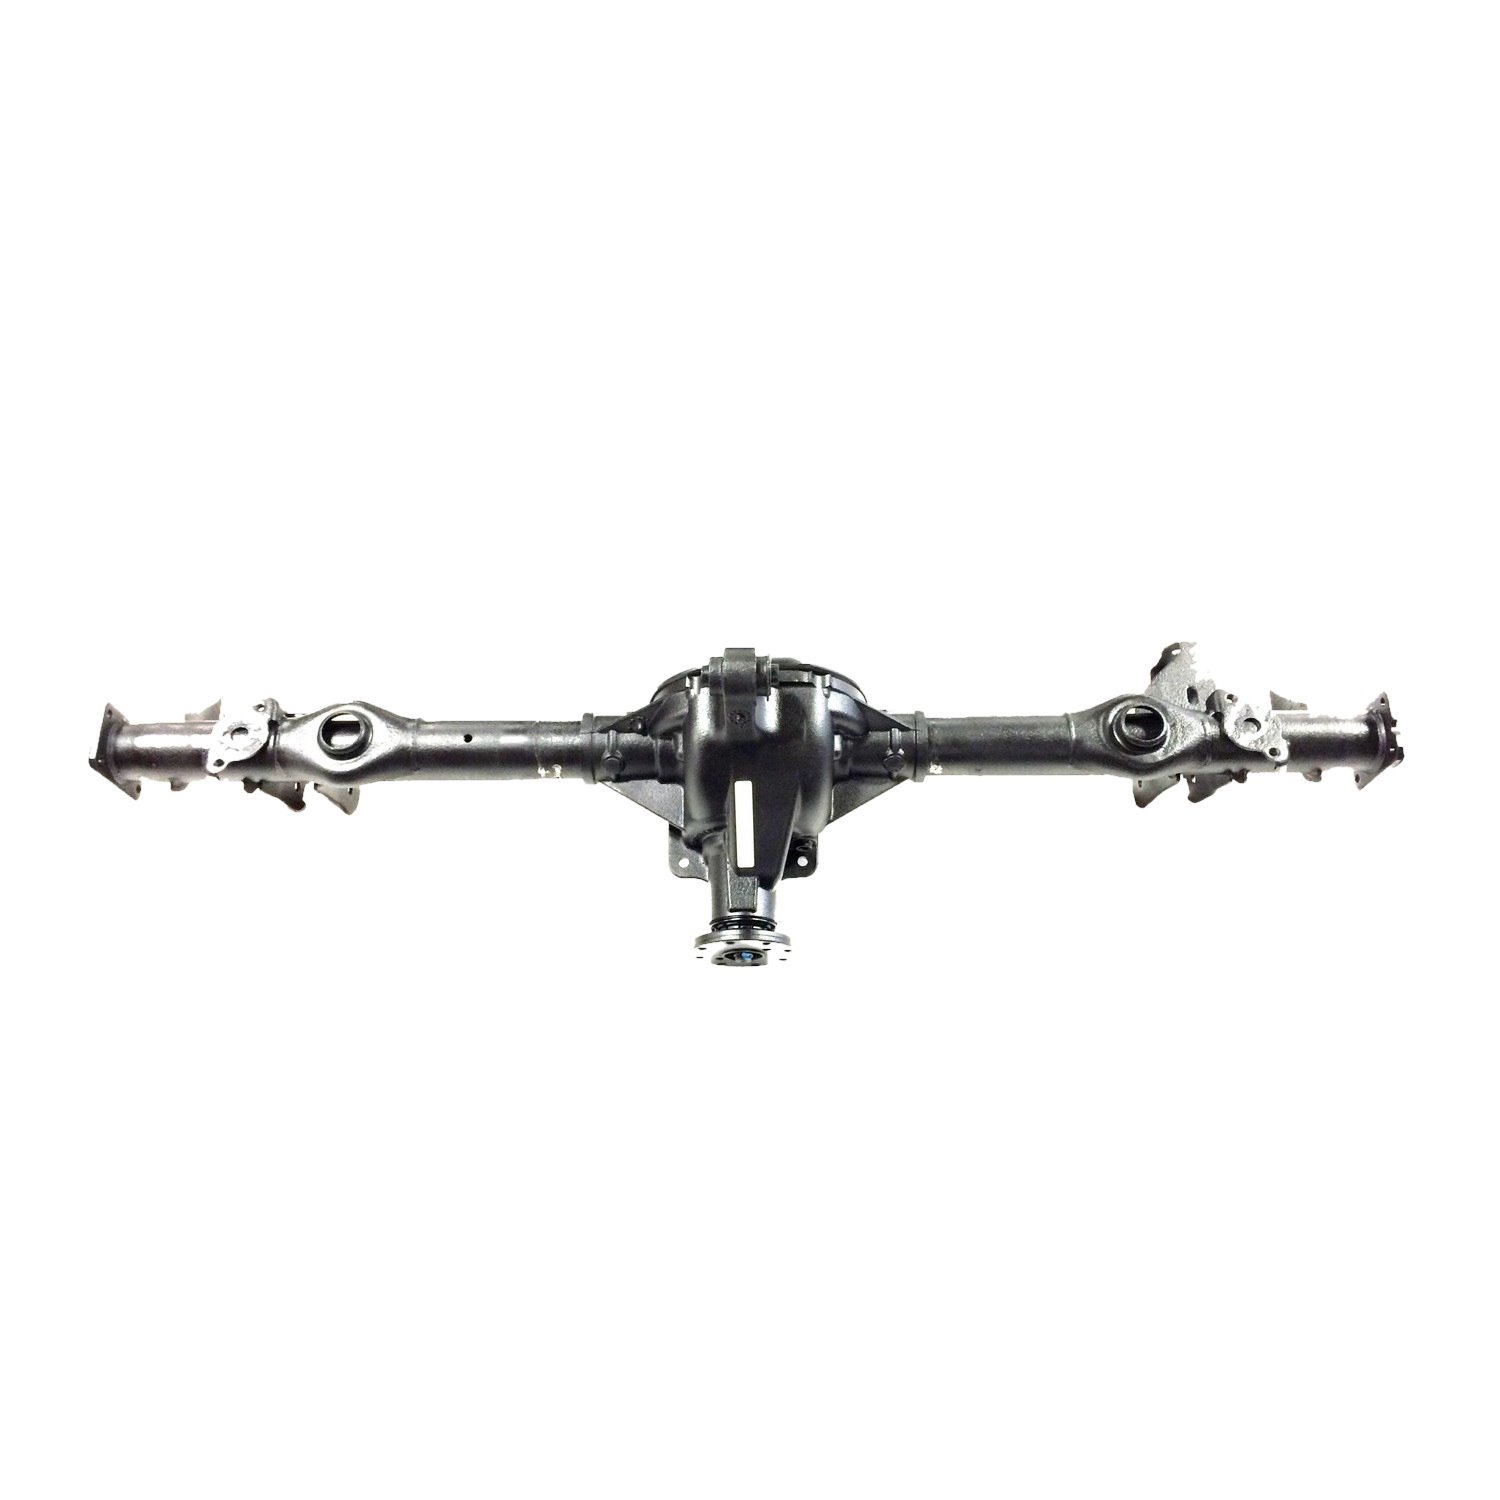 Reman 215mm IRS Axle Assembly, 2010-14 Dodge Challenger, 2.87 Ratio, W/O Limited Slip